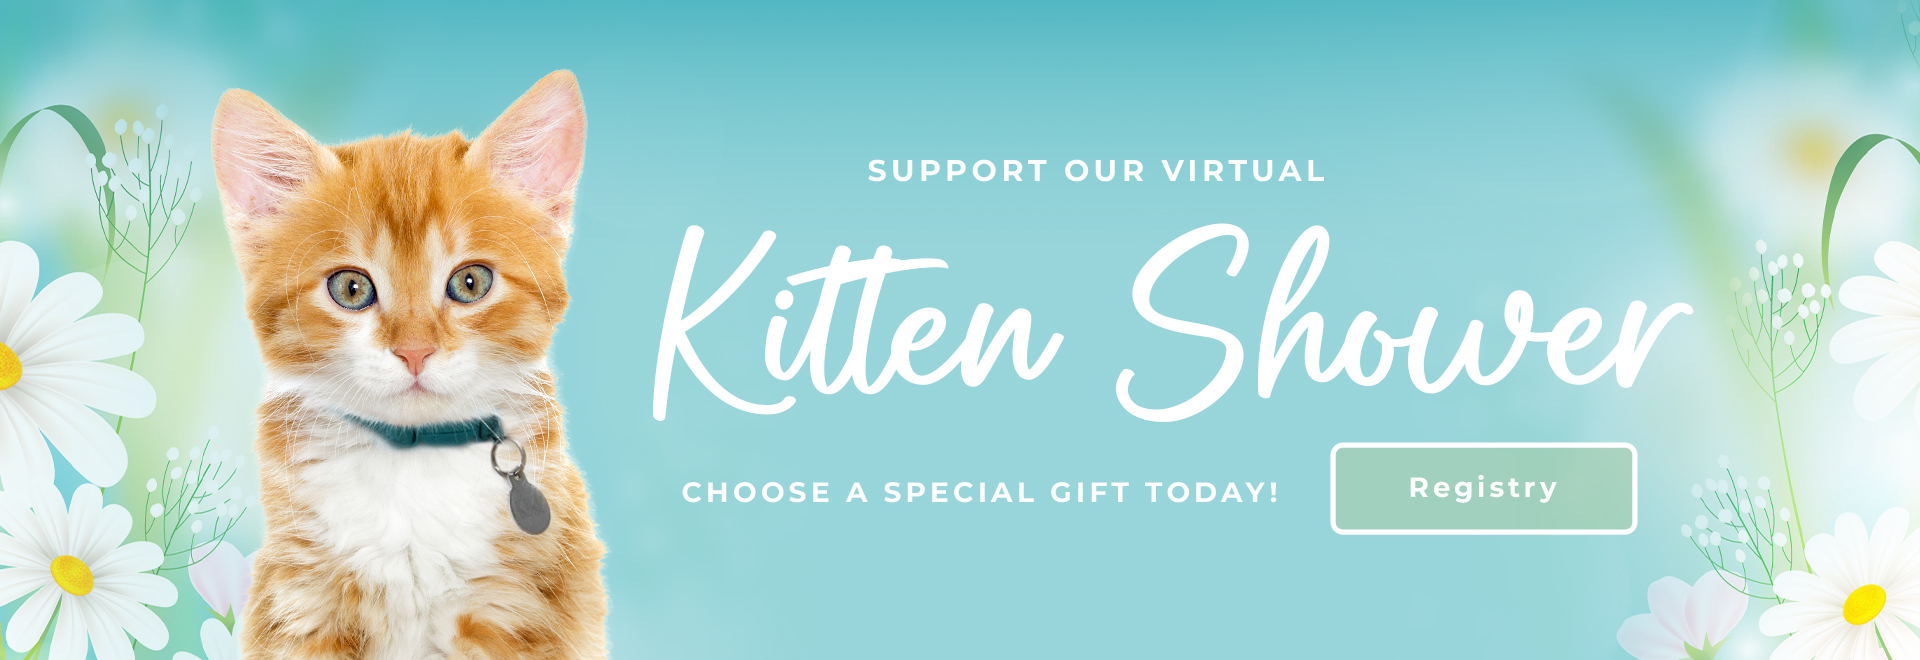 Support our virtual Kitten Shower. Choose a special gift today!